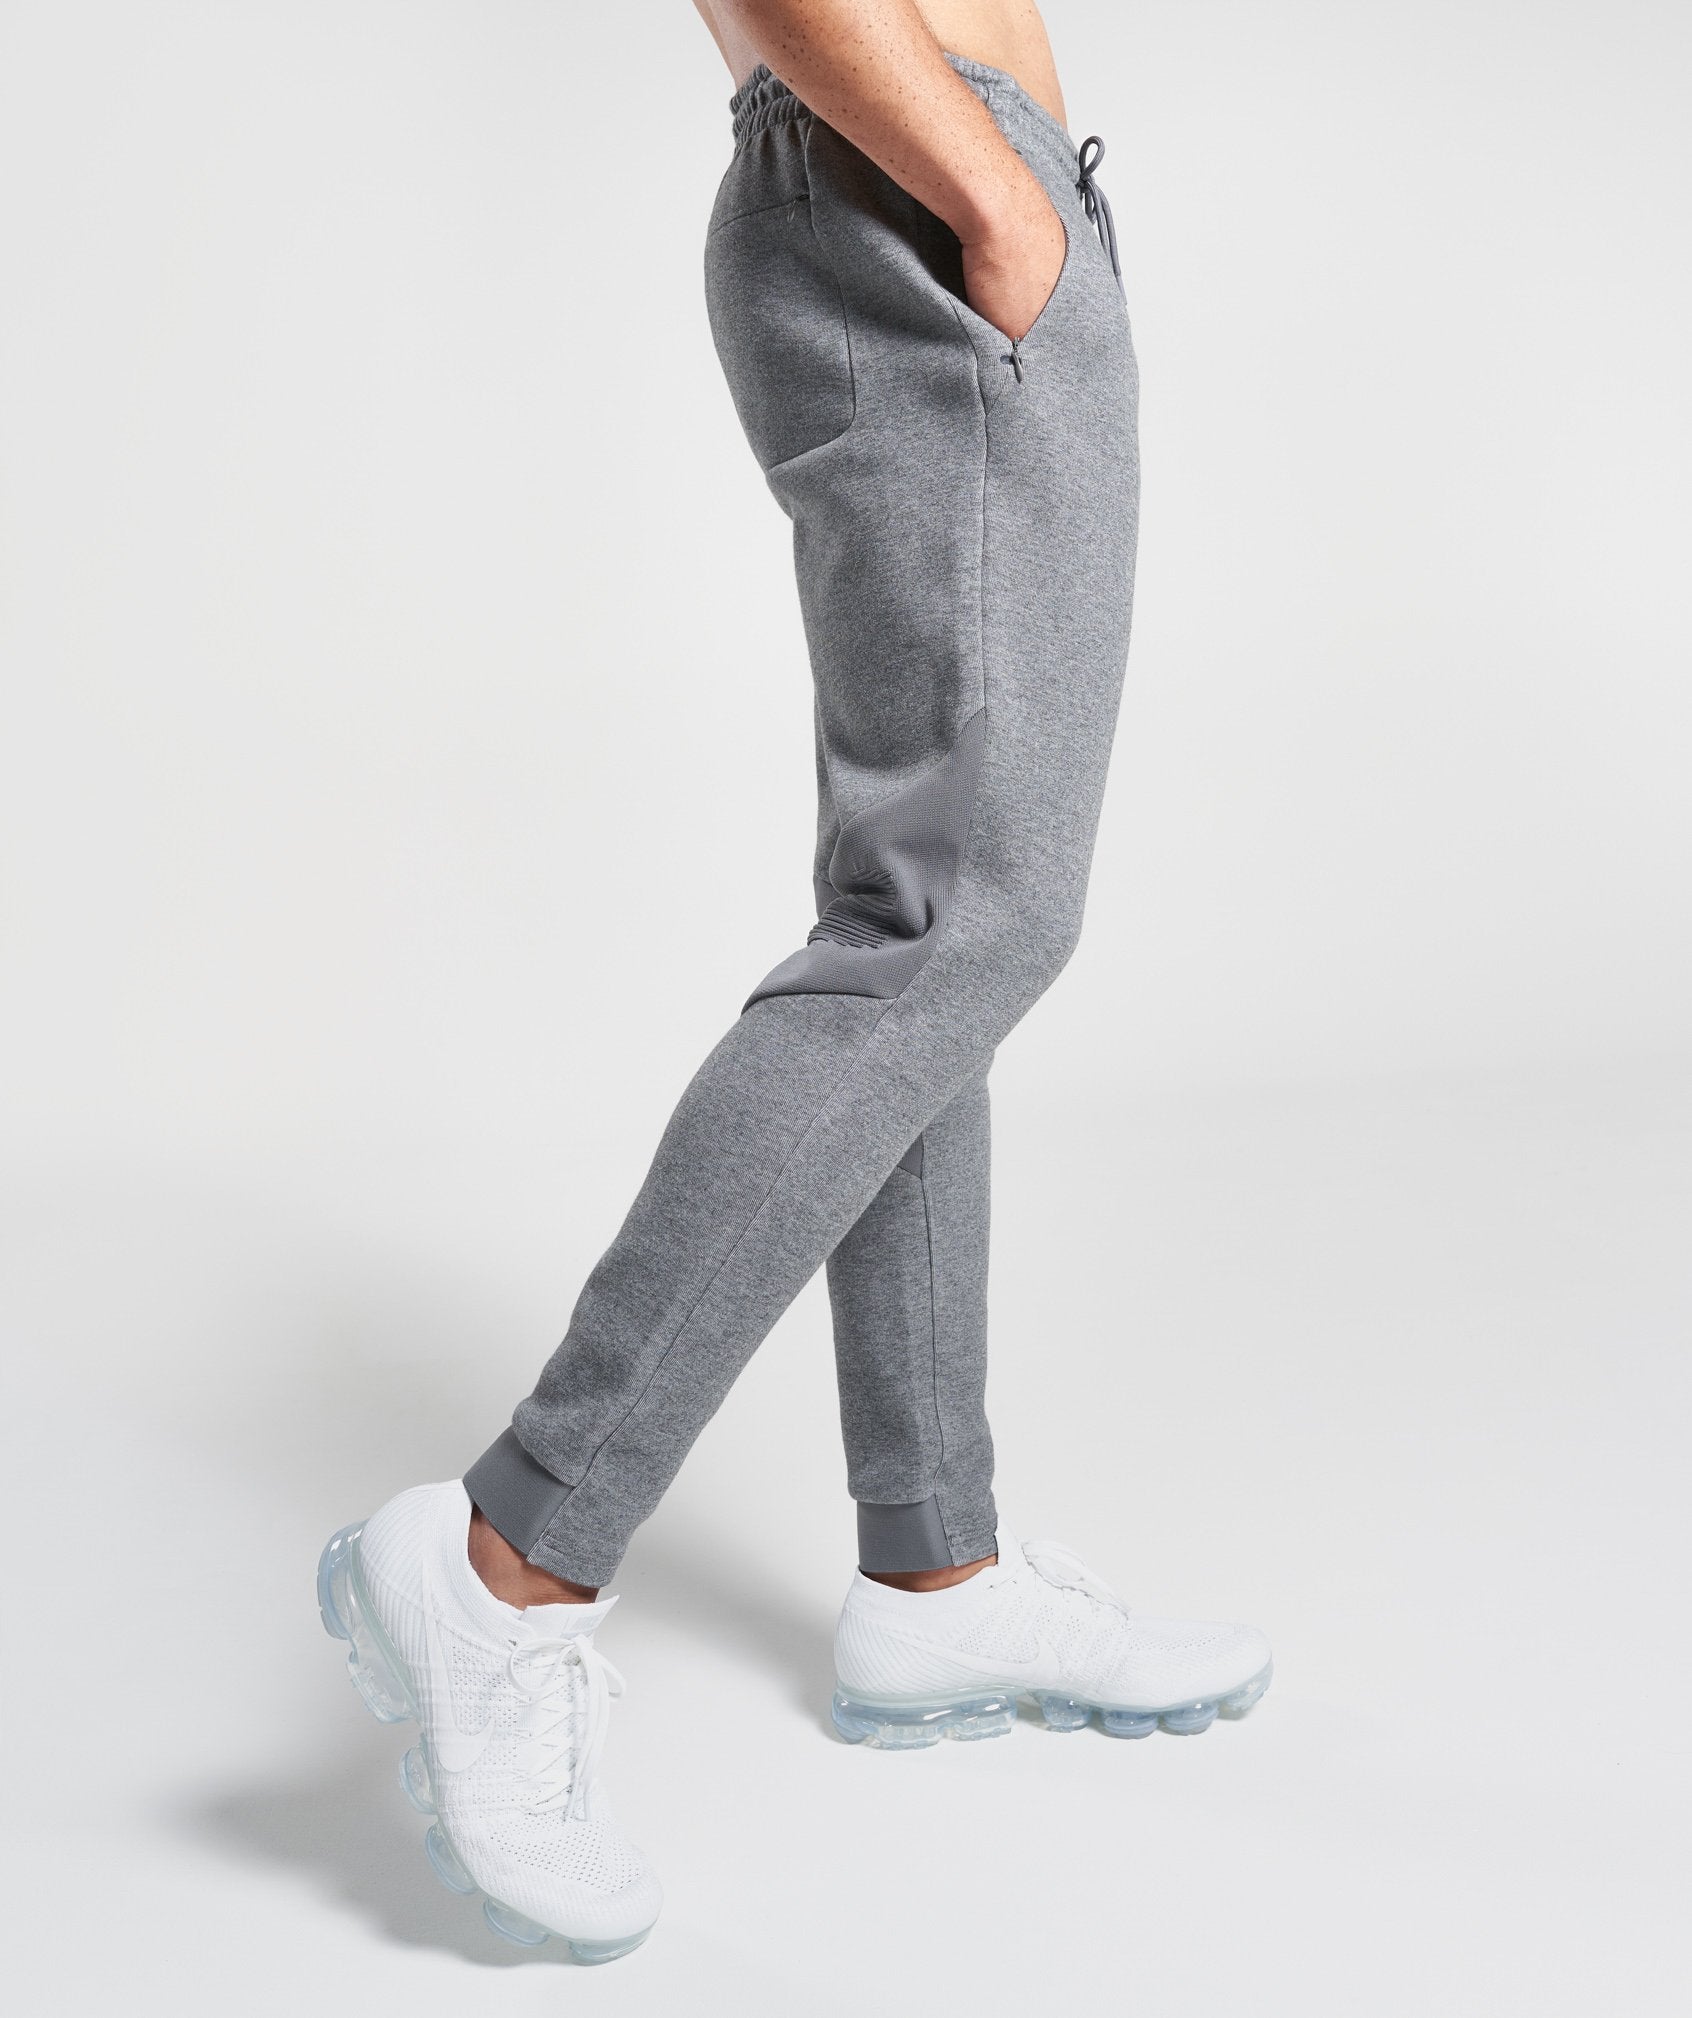 Ozone Bottoms in Charcoal Marl - view 2